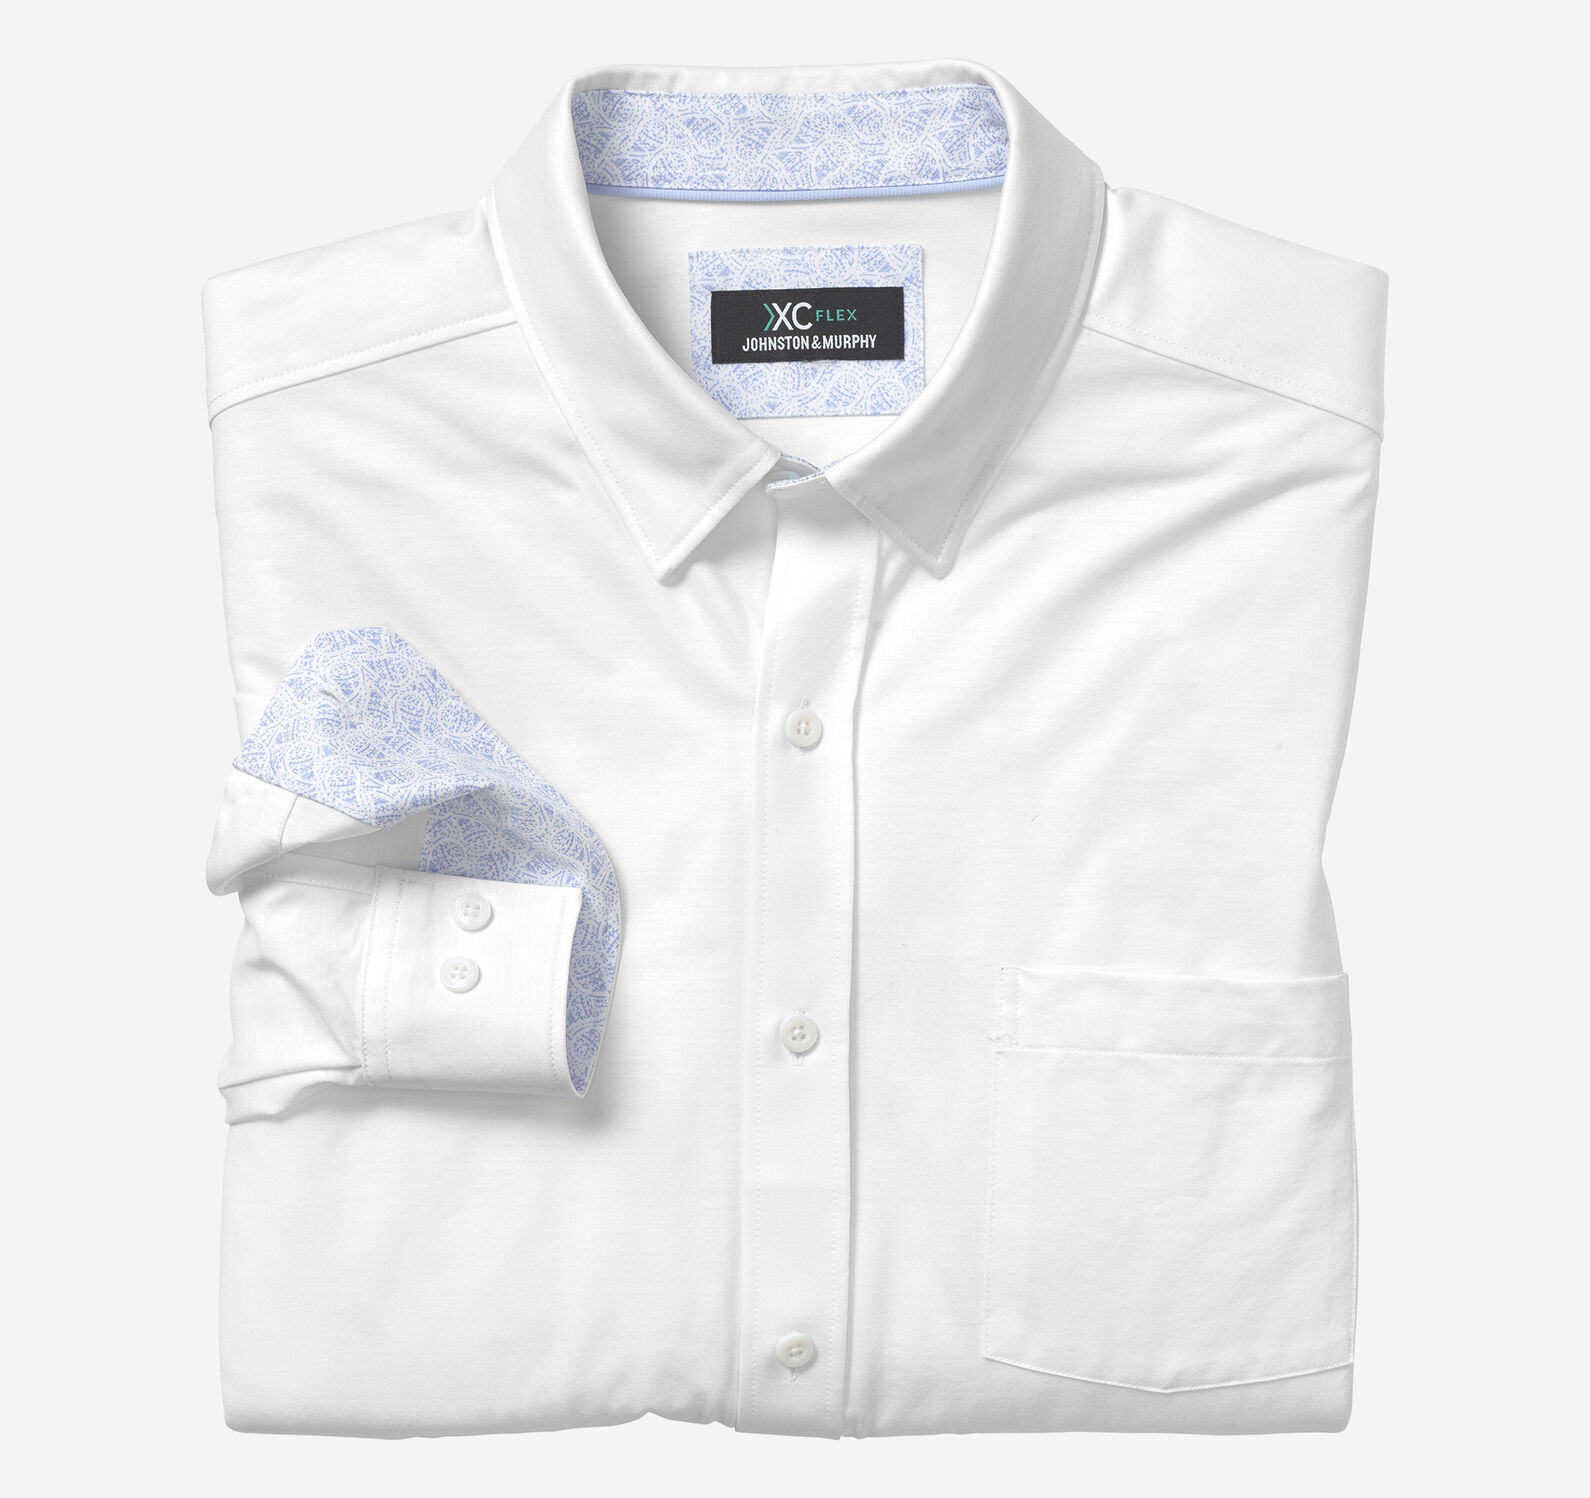 Columbia ~ Out and Back II Men's Button Down Shirt $50 NWT